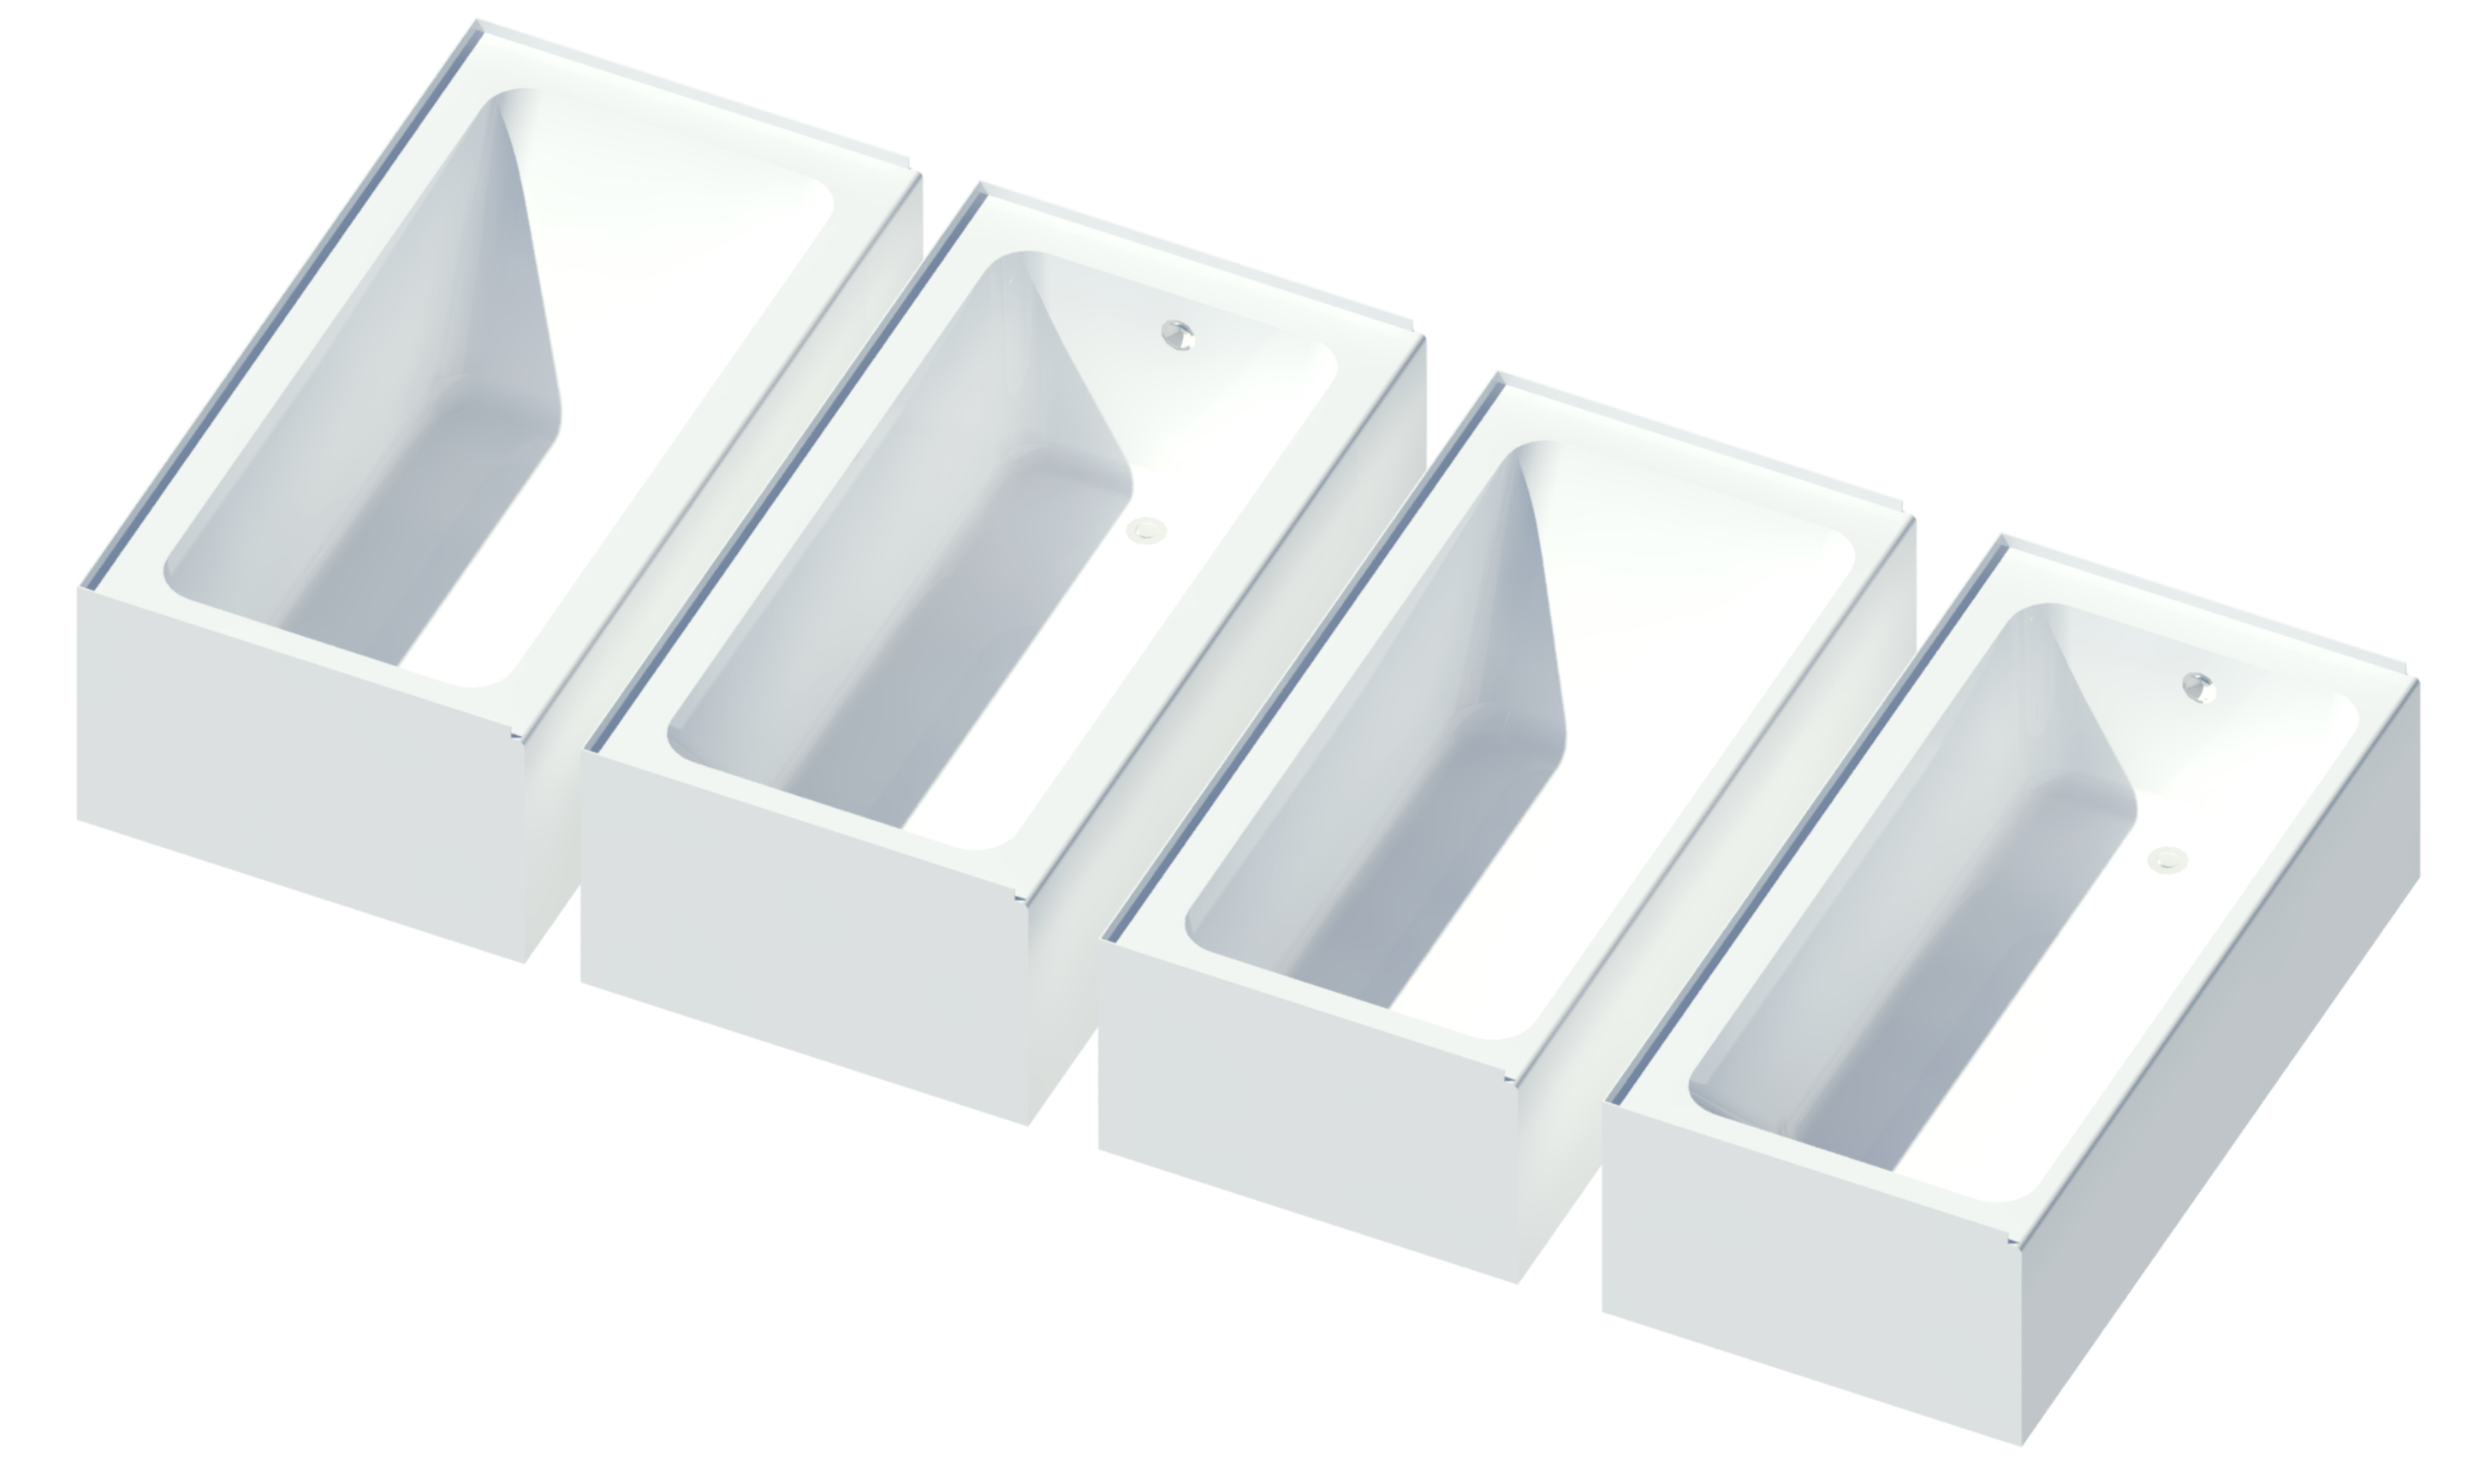 Revit raytrace showing the Mansfield Pro Spec model in a white finish with four types differening in size and left or right drain orientation.